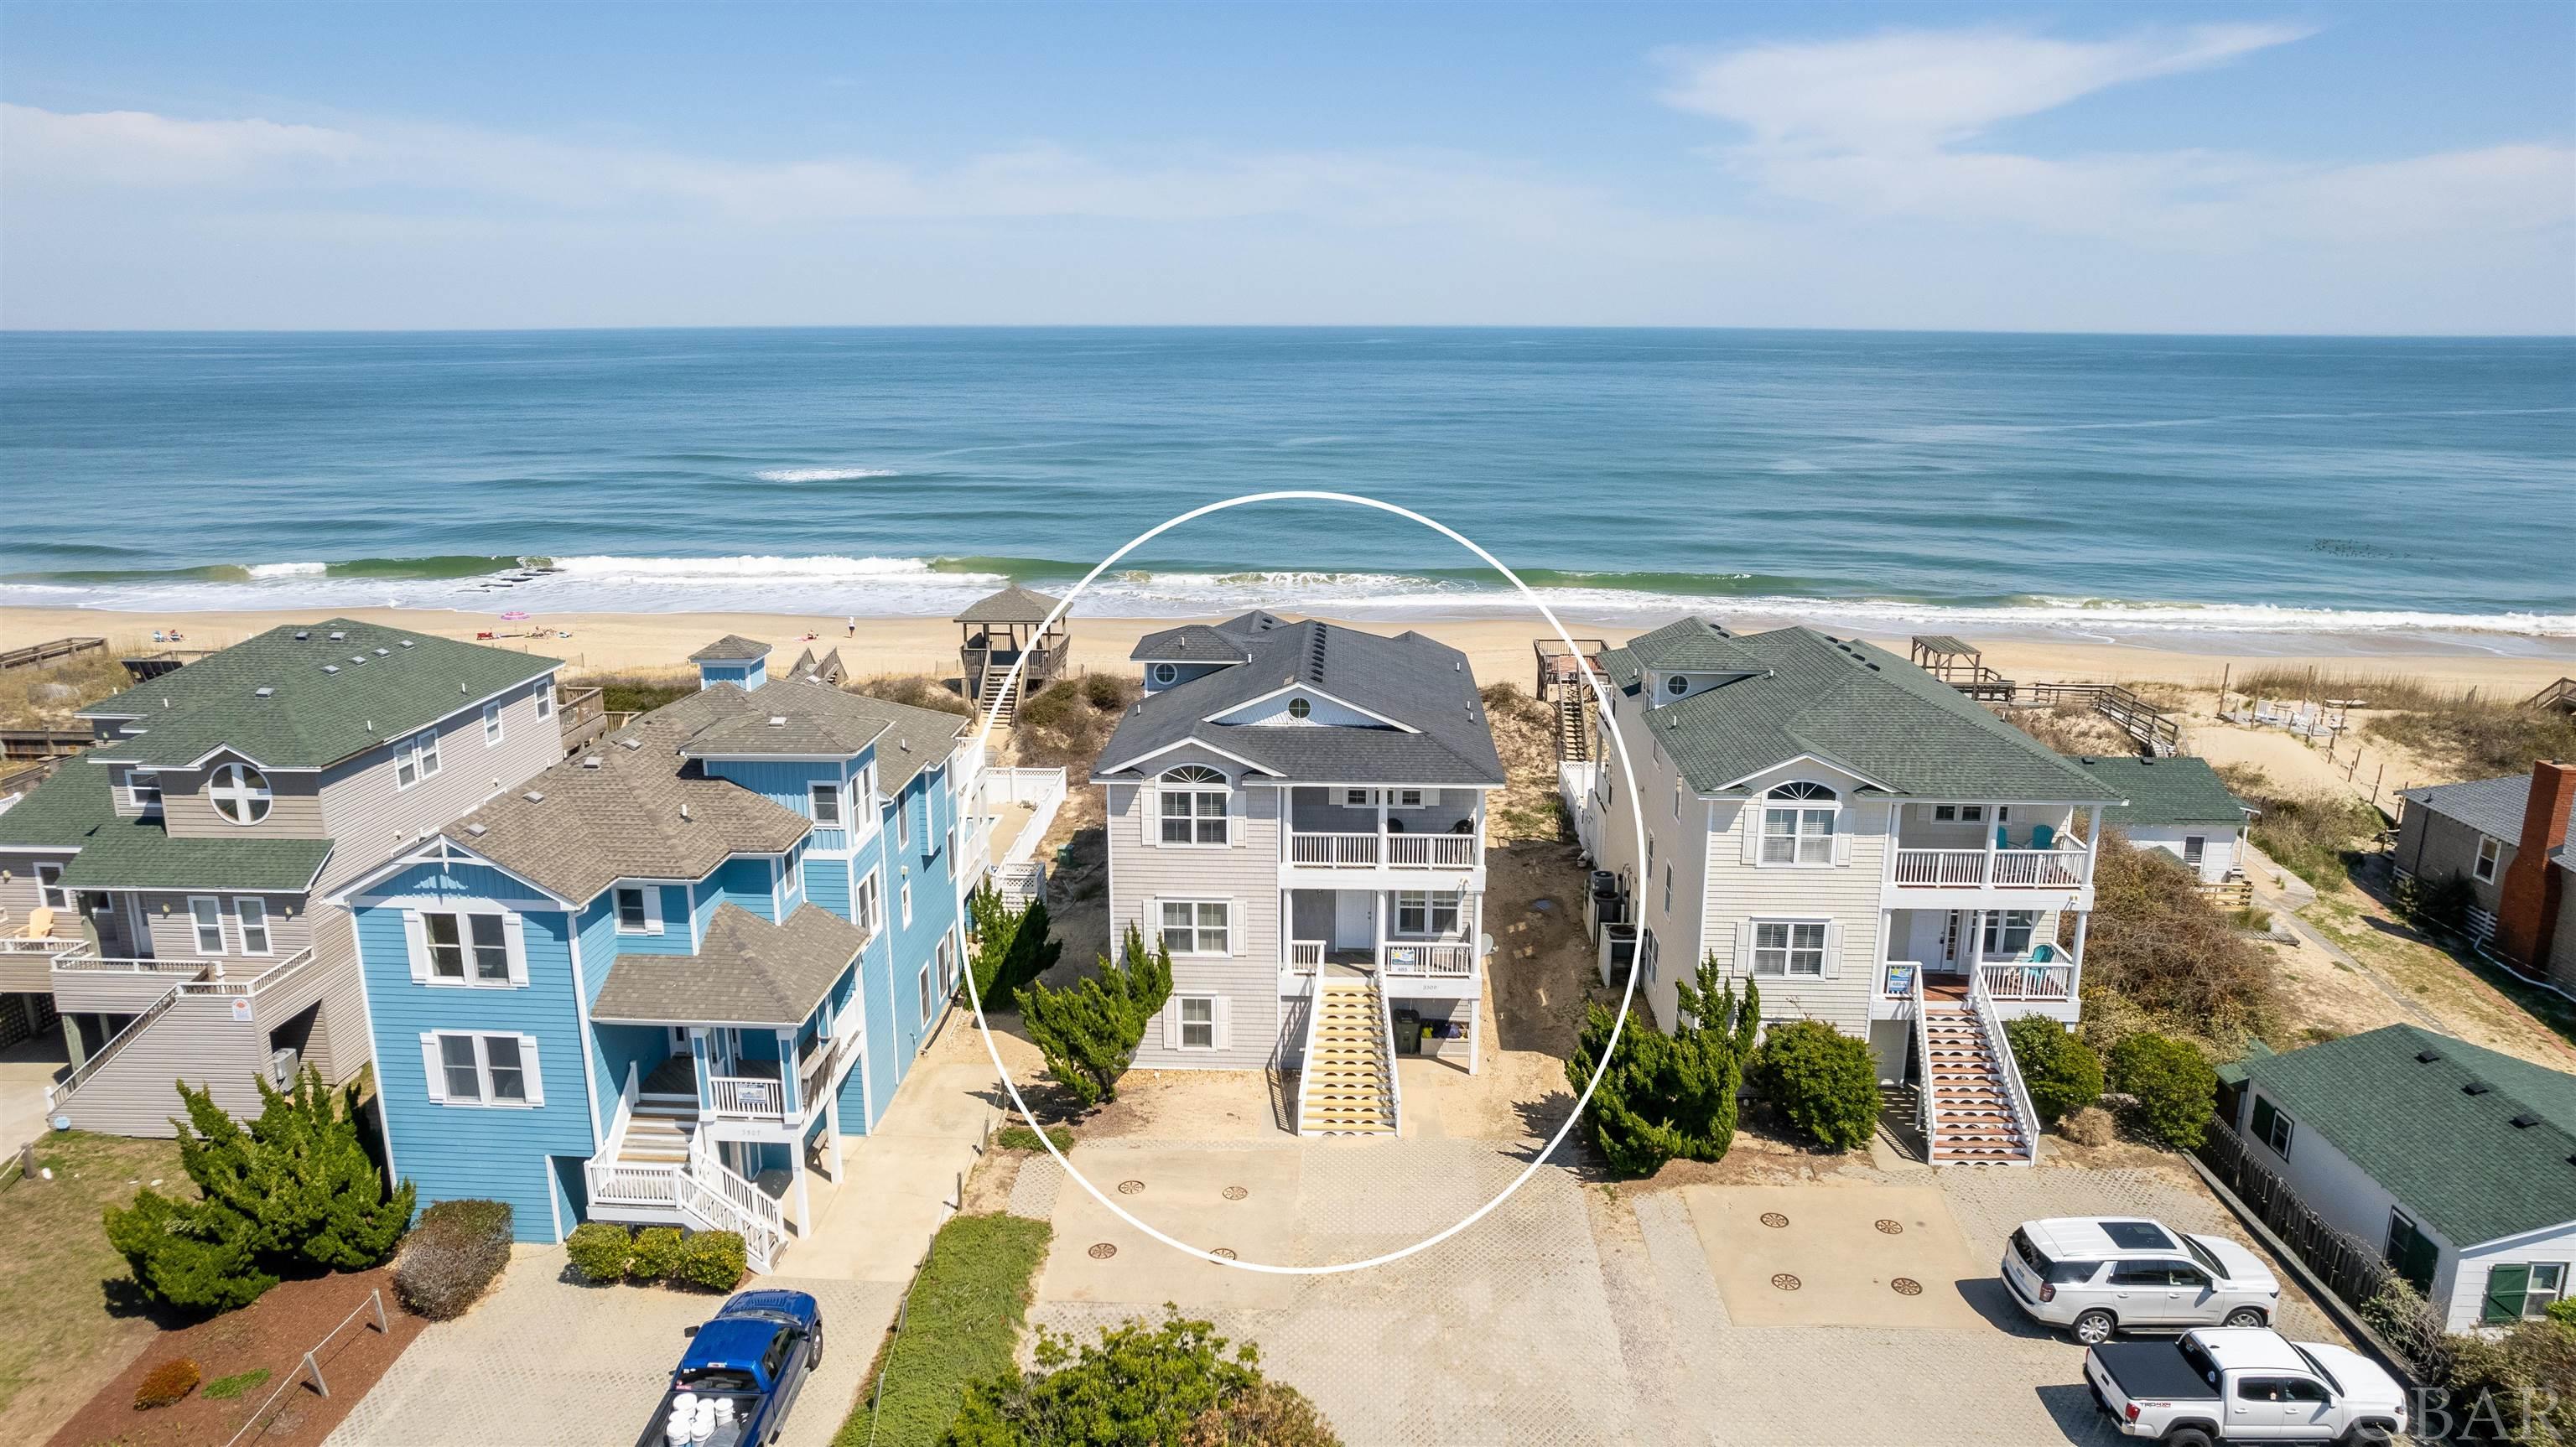 AN INVESTOR'S DREAM...INCREDIBLE OPPORTUNITY TO OWN A 10 BEDROOM OCEANFRONT IN THE HEART OF NAGS HEAD w/ over 10% GRR in 2023!  Almost every room in this home features a stunning Ocean View, and the top level primary suite has its own private balcony with views of Jockey Ridge State Park.  You cannot ask for a better location in Nags Head!  The reverse floor plan allows you to soak in the Ocean Views while socializing between the spacious open plan Kitchen, Dining, and Living Room area.  The top level primary suite is a great escape offering a jetted tub and private balcony overlooking Jockey's Ridge State Park with incredible sunsets.  There is plenty of room to spread out and entertain as the property also offers a ship's watch with card table off the living area, along with a mid level Den and Ocean View Game Room.  Yes, you read that correctly!  A mid level Ocean View Game Room ... not on the ground level, so you can play AND enjoy the stunning water views at the same time!  A handicap friendly elevator also makes for quick and easy access to each level.  Outside the entertainment options continue with a 12x30 private and heated fiberglass pool, 'kiddie' pool, 8 person hot tub, grill, and private beach walkway with a large sun deck to enjoy the views from sunrise to sunset!  This property is ideally located around MP 11.5 and close to several Outer Banks classics including Tortuga's Lie, Bonnett Street beach access, Dowdy Park, Lucky 12 Tavern, the Nags Head Pier, Surfin' Spoon, and Jockey's Ridge!  Not to mention, over $335,000 in Gross Rental Income for 2023, a NEWER Roof ('17), and a NEW Dune Deck ('23), 2 NEW Heat Pumps and Air Handlers ('23), and NEW Kitchen Counters and Sink in Nov. '23!  The 'Salt Palace' is turn key and ready to be your new OBX income producing property in 2024!